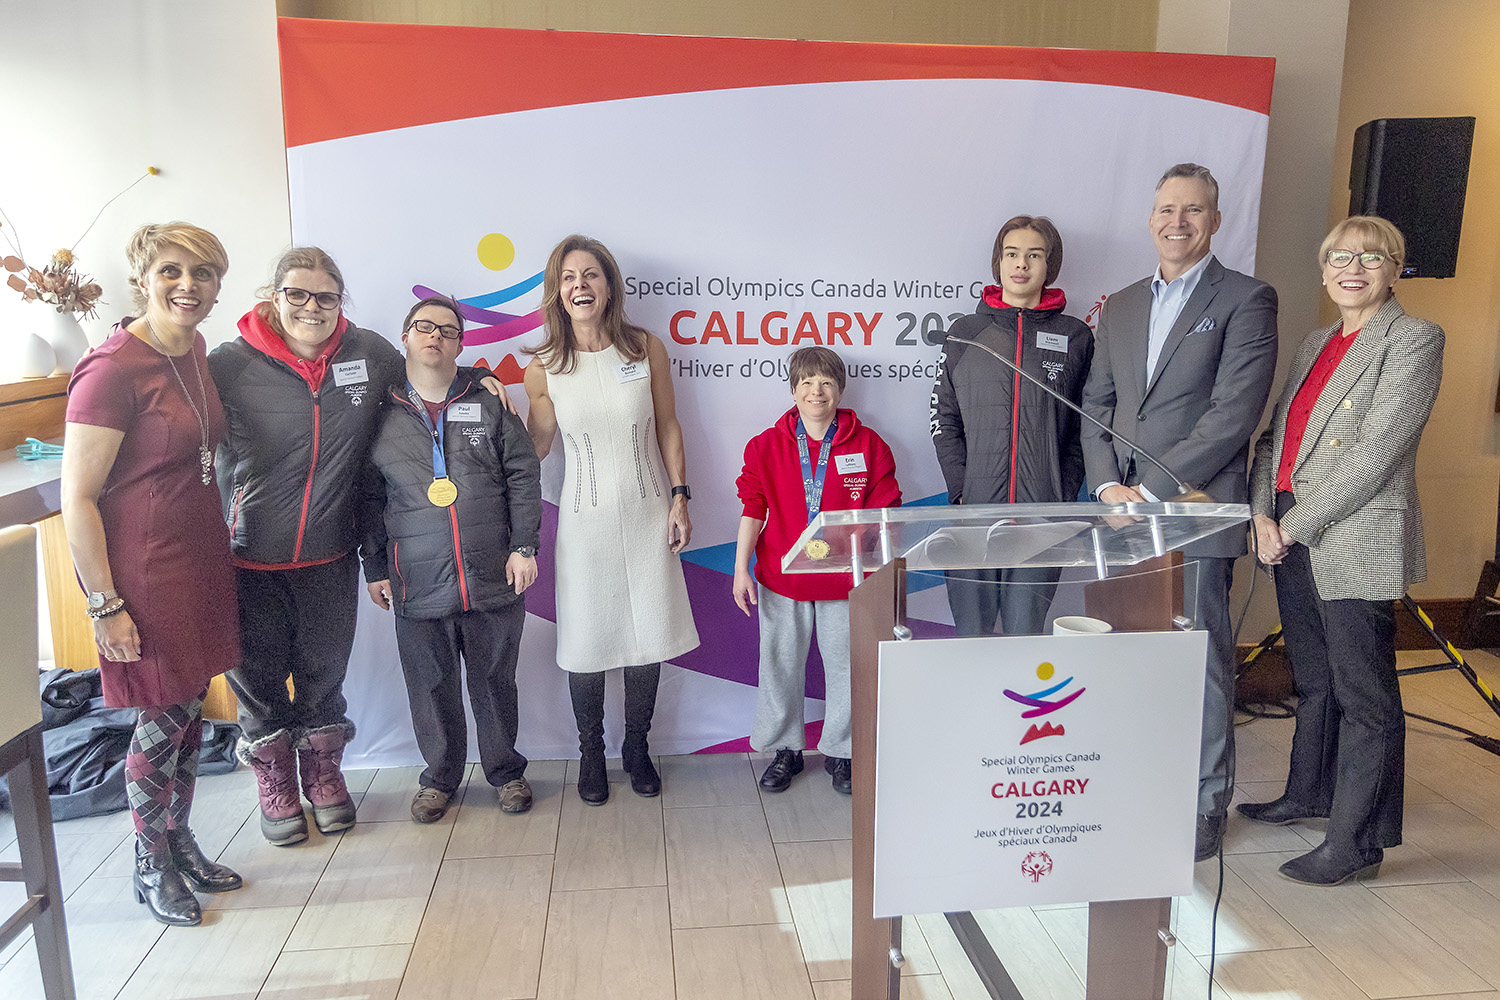 Details on 2024 Special Olympics Canada Winter Games in Calgary